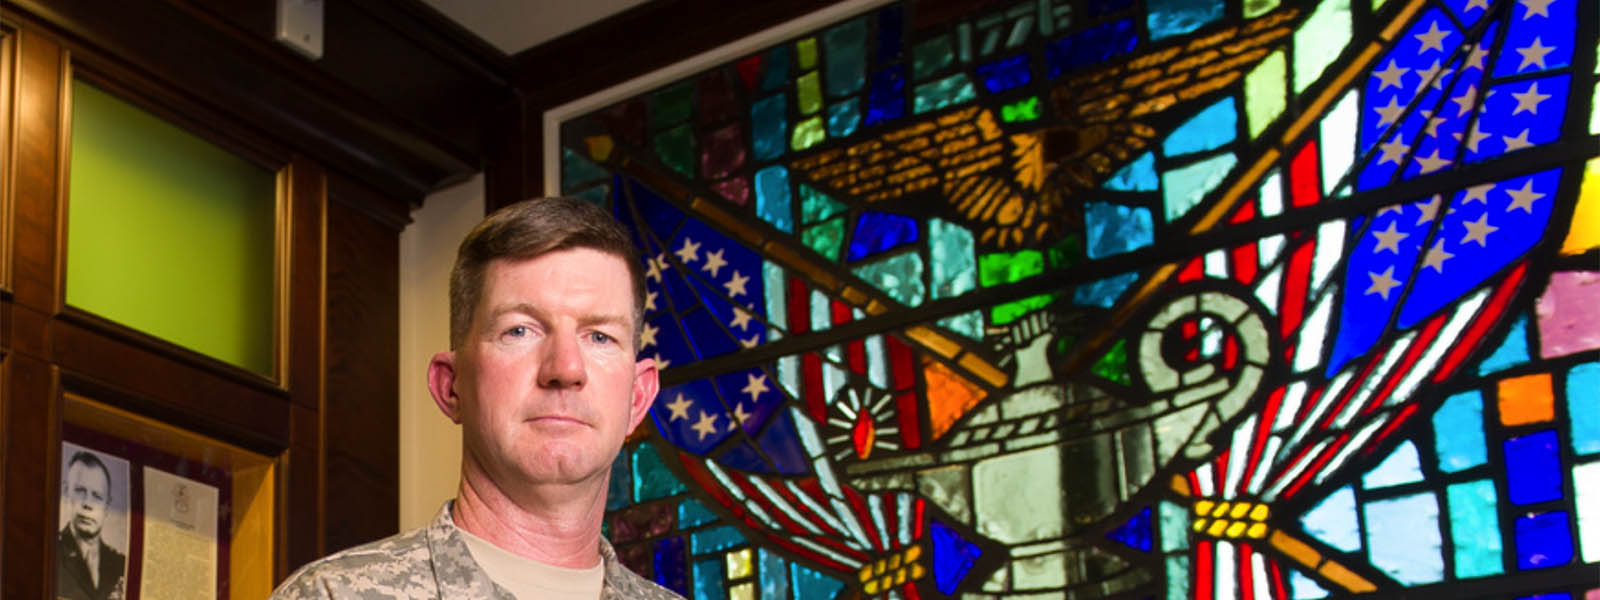 Uniformed man stands in front of stained-glass window